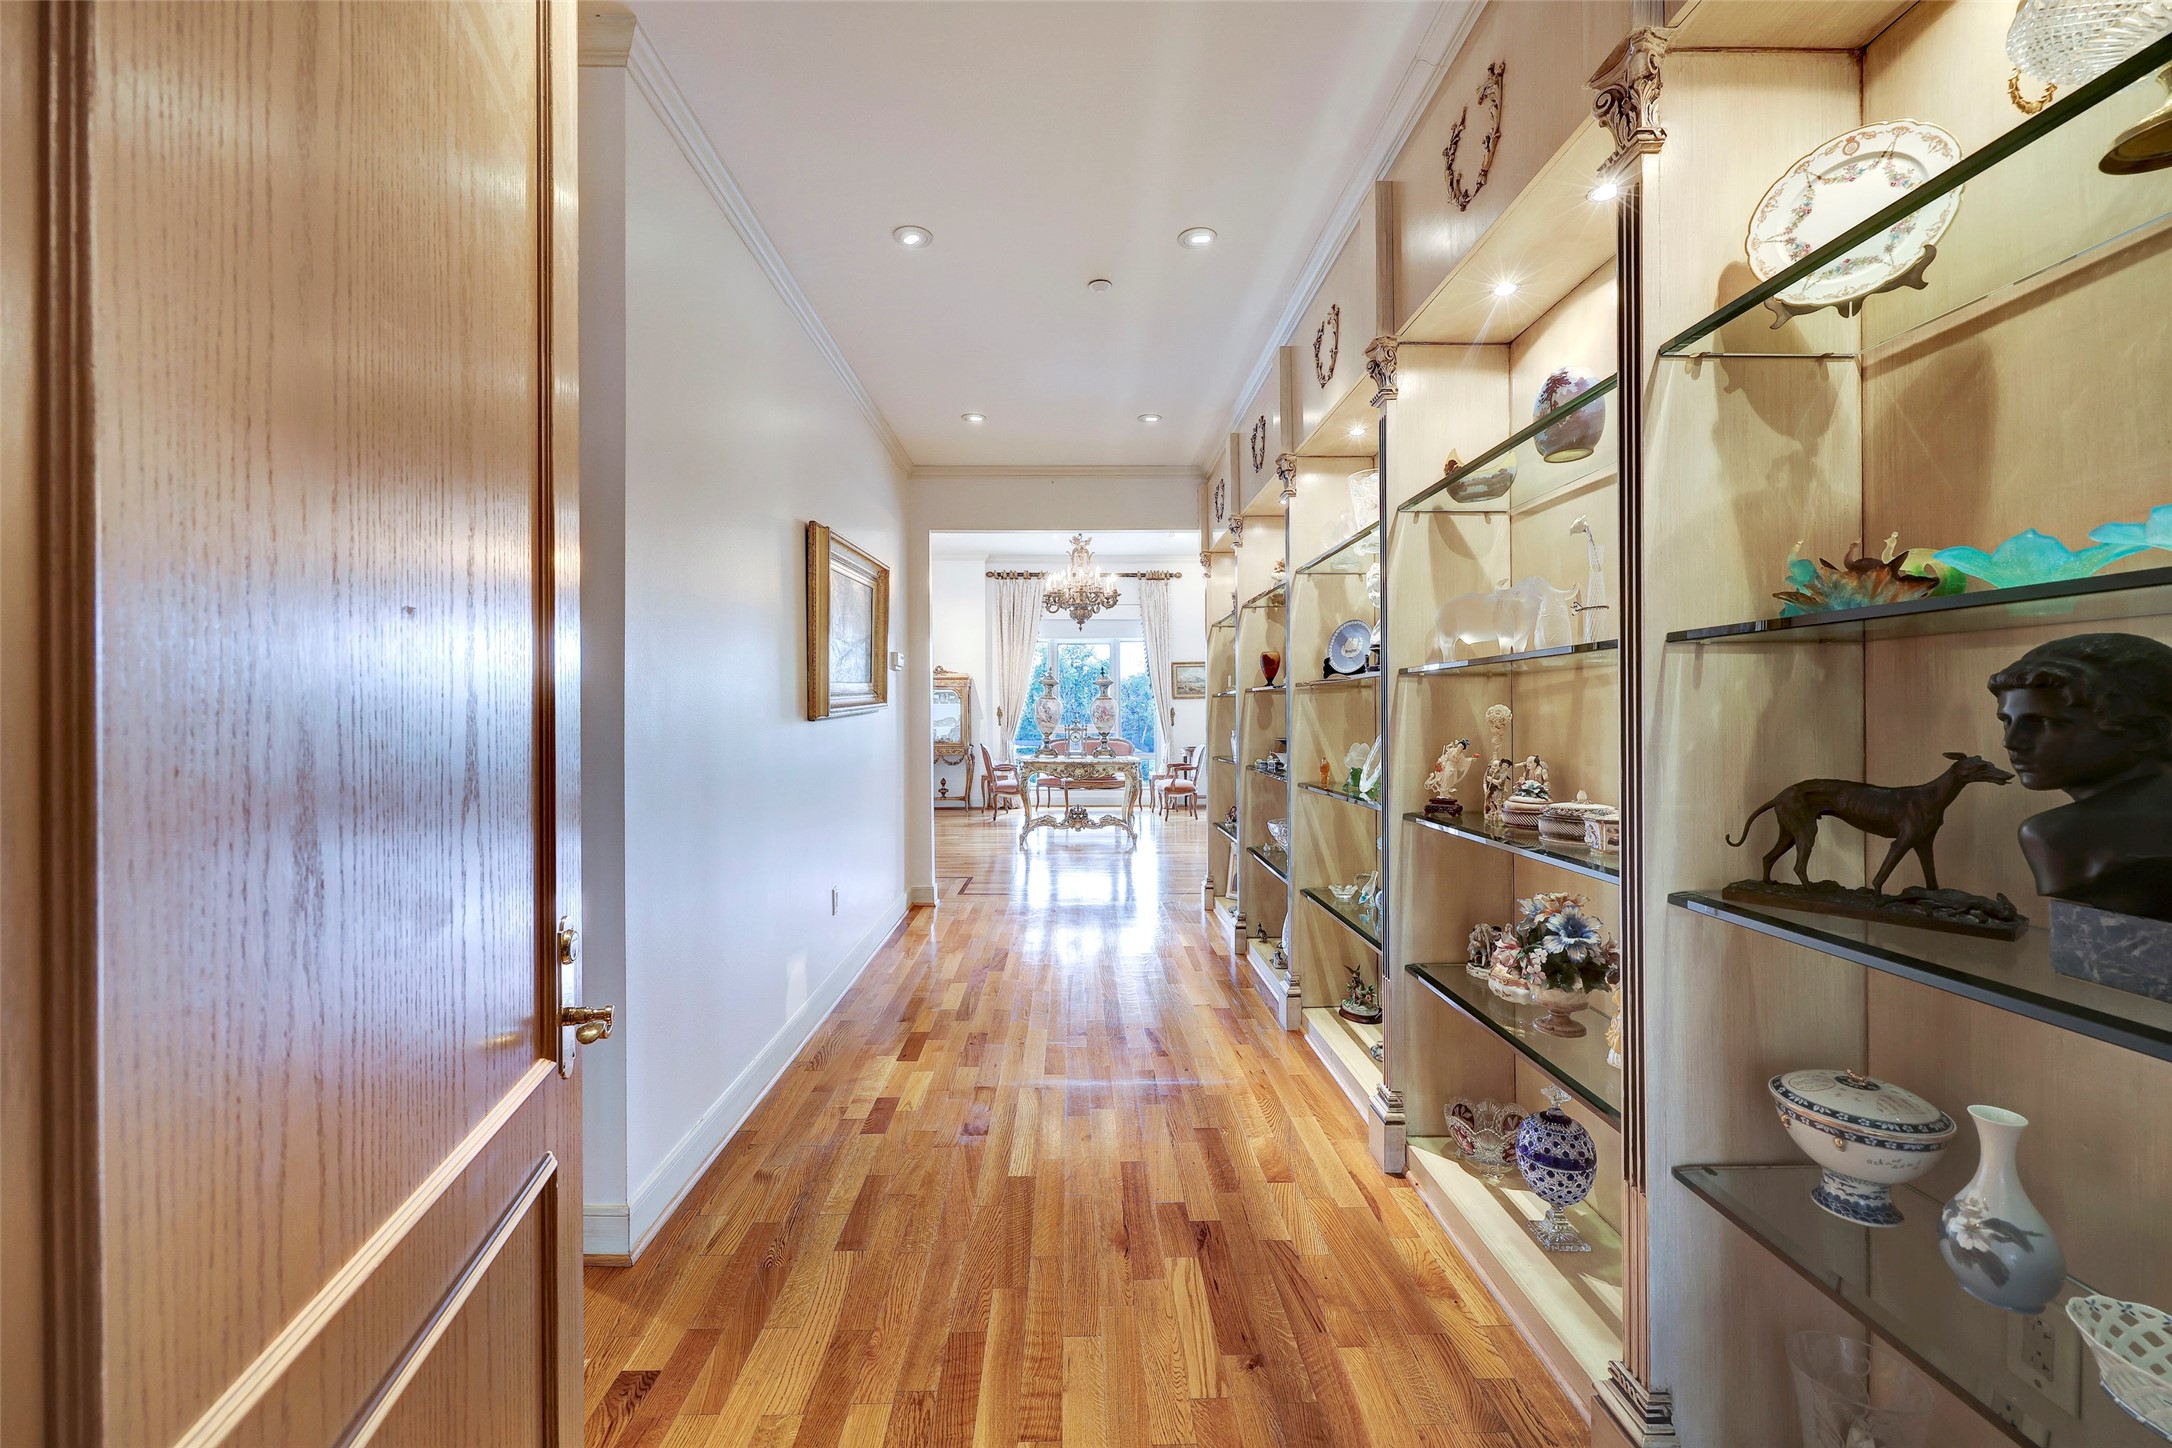 Upon entering, the right wall is a lighted display case with glass shelves.